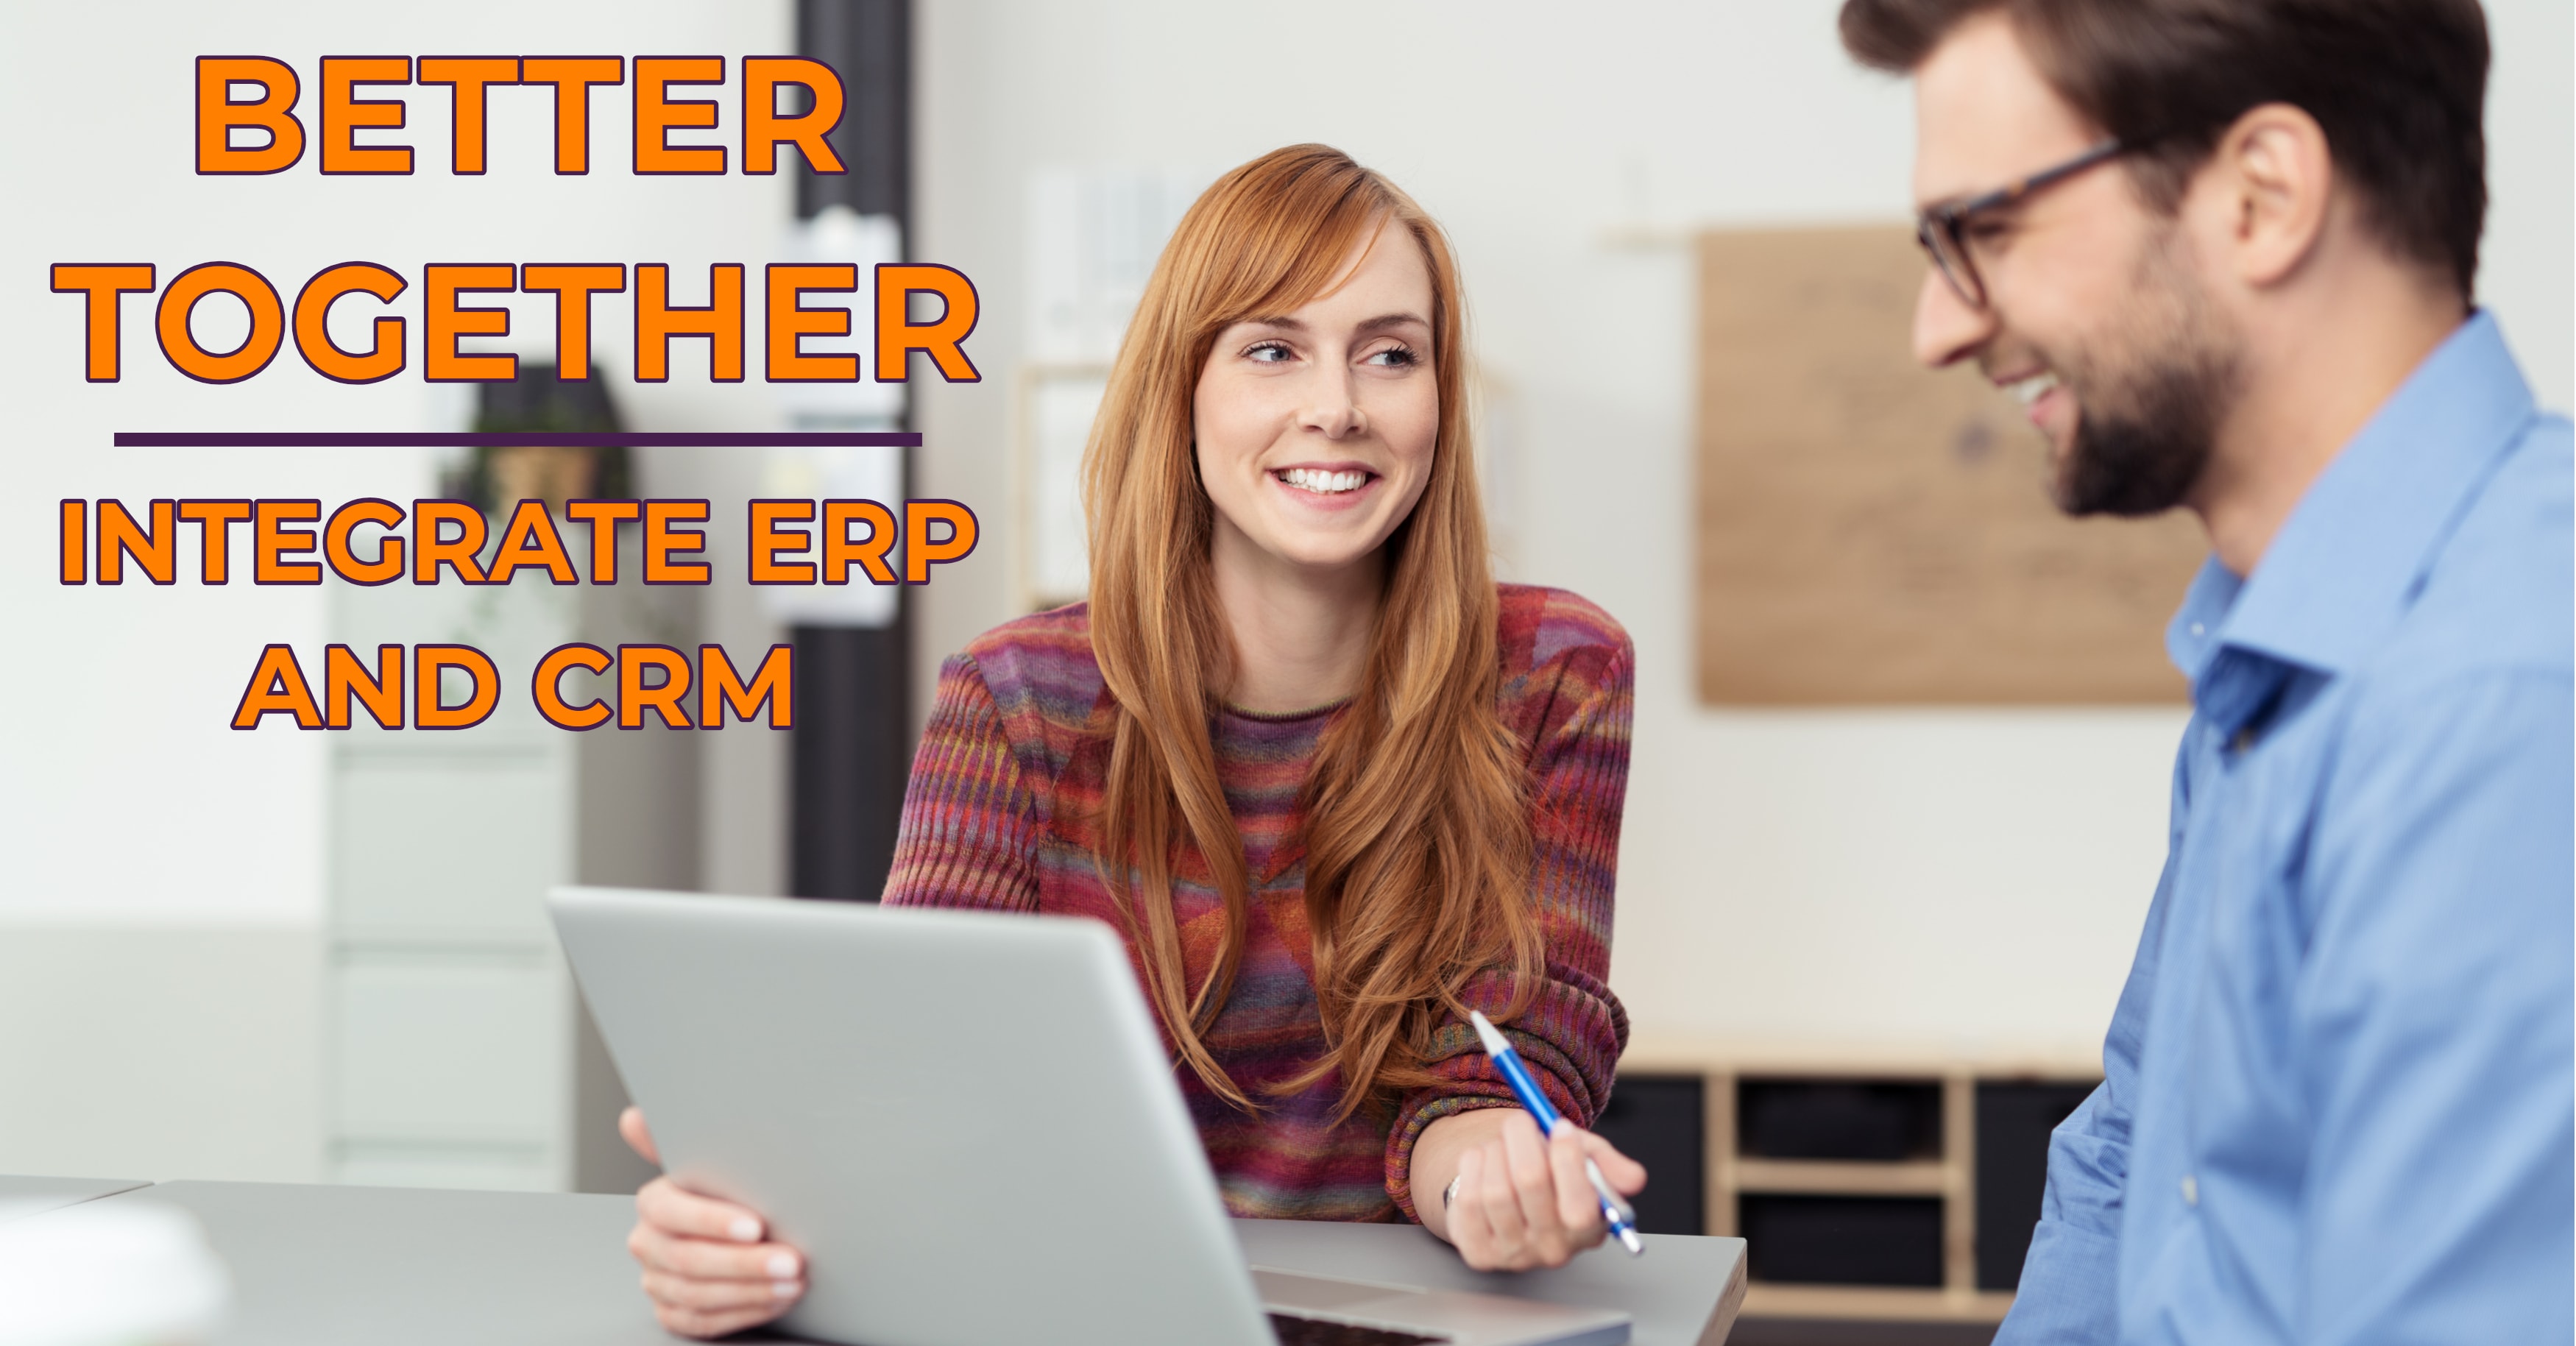 Better Together: Integrate ERP and CRM